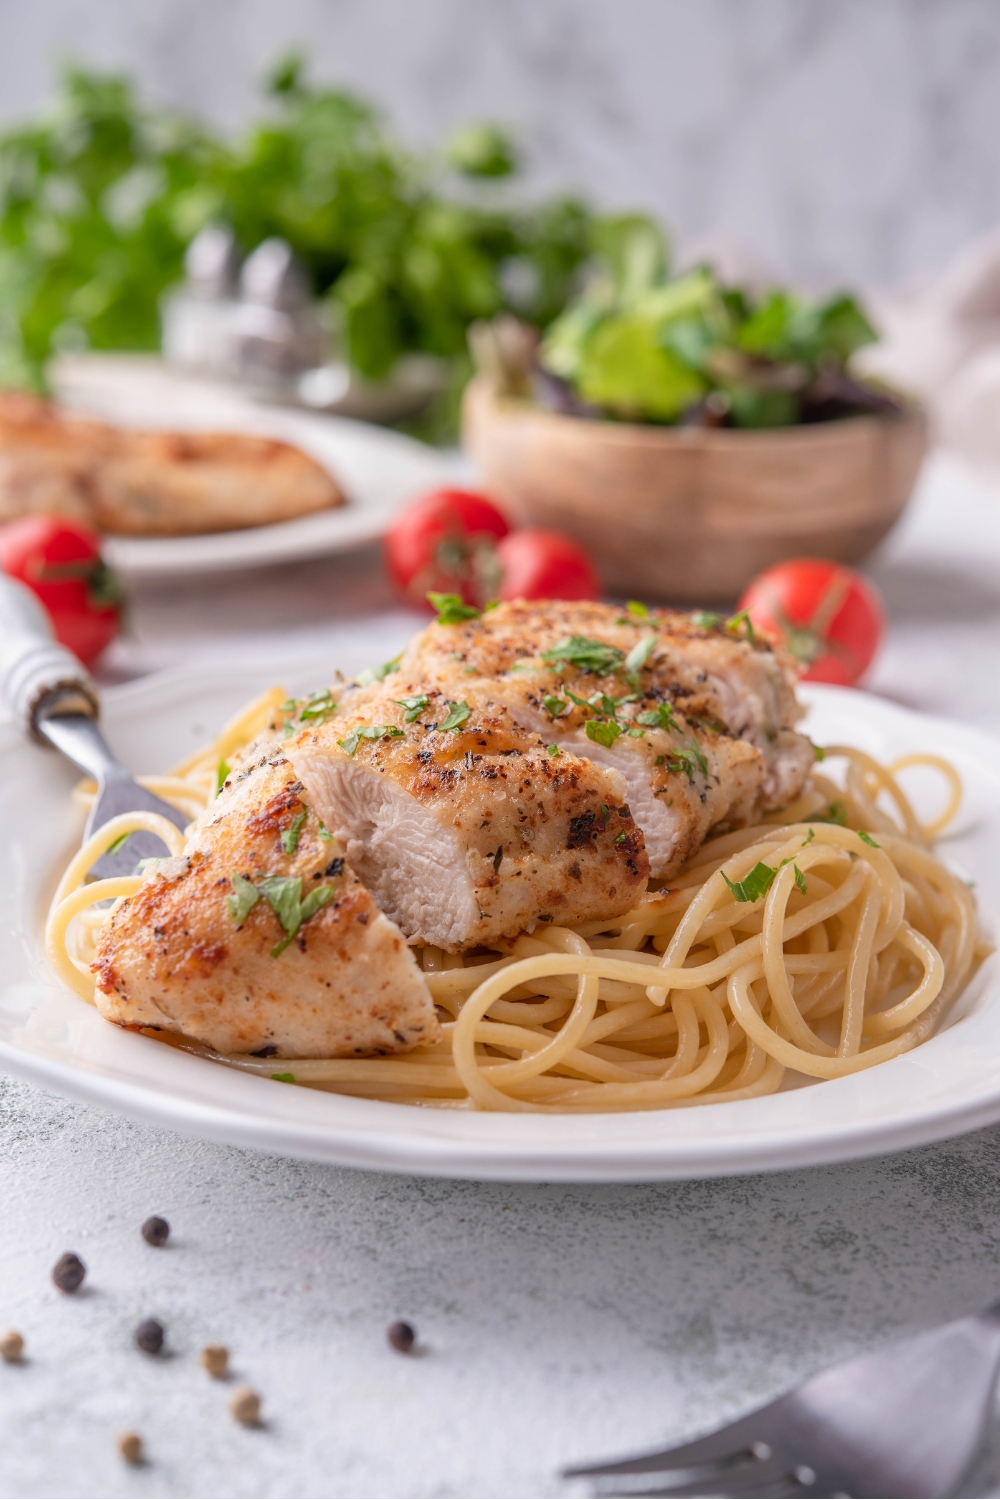 A sliced pan-fried chicken breast atop a bed of spaghetti noodles on a white plate with a fork on the plate. The chicken is garnished with fresh green herbs.